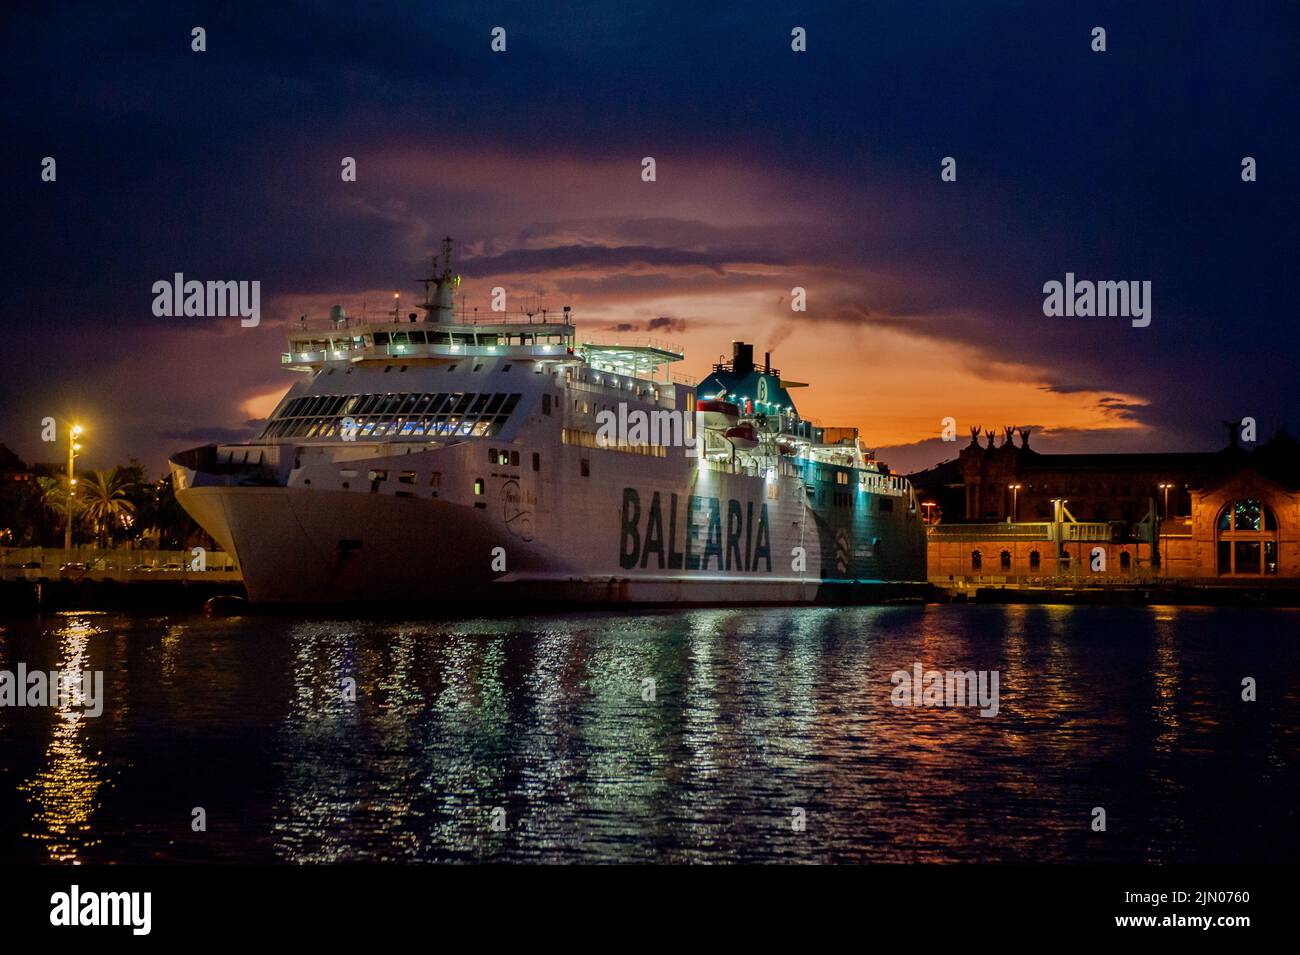 A ferry ship of the  Spanish shipping company Balearia is seen docked at Barcelona Port Vell, Spain. Stock Photo